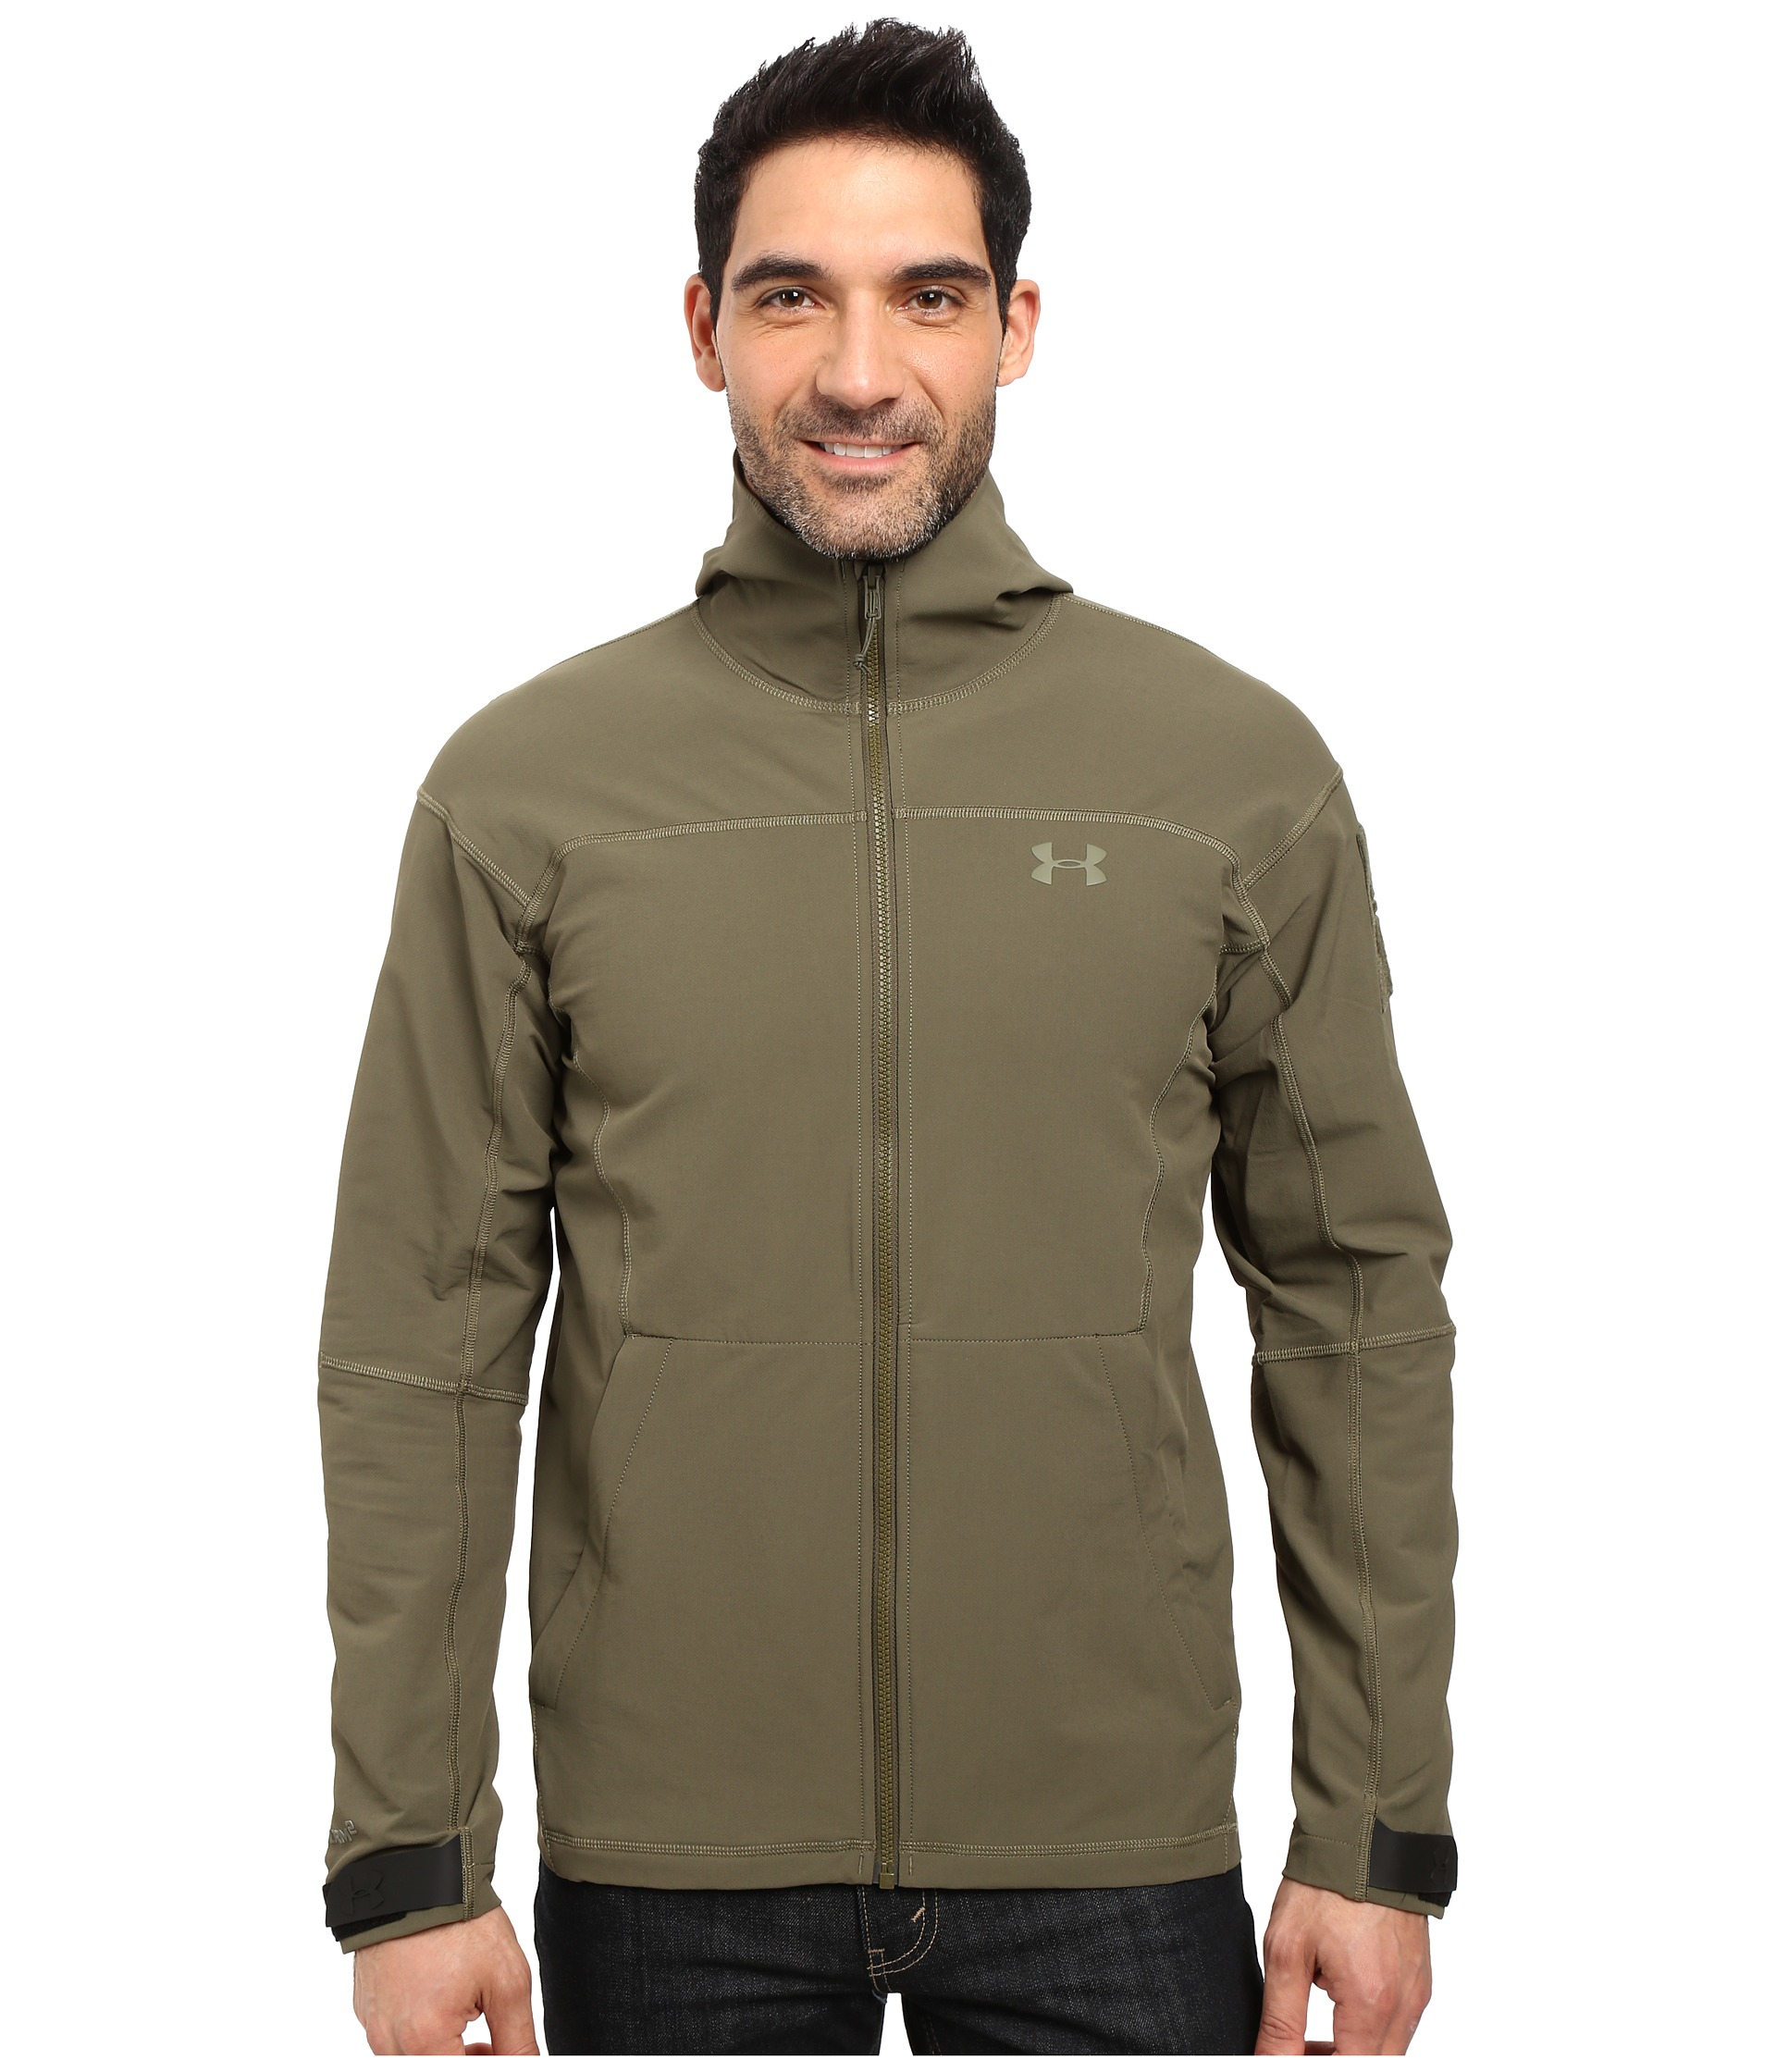 Under Armour Tactical Softshell 3.0 Online, SAVE 59%.